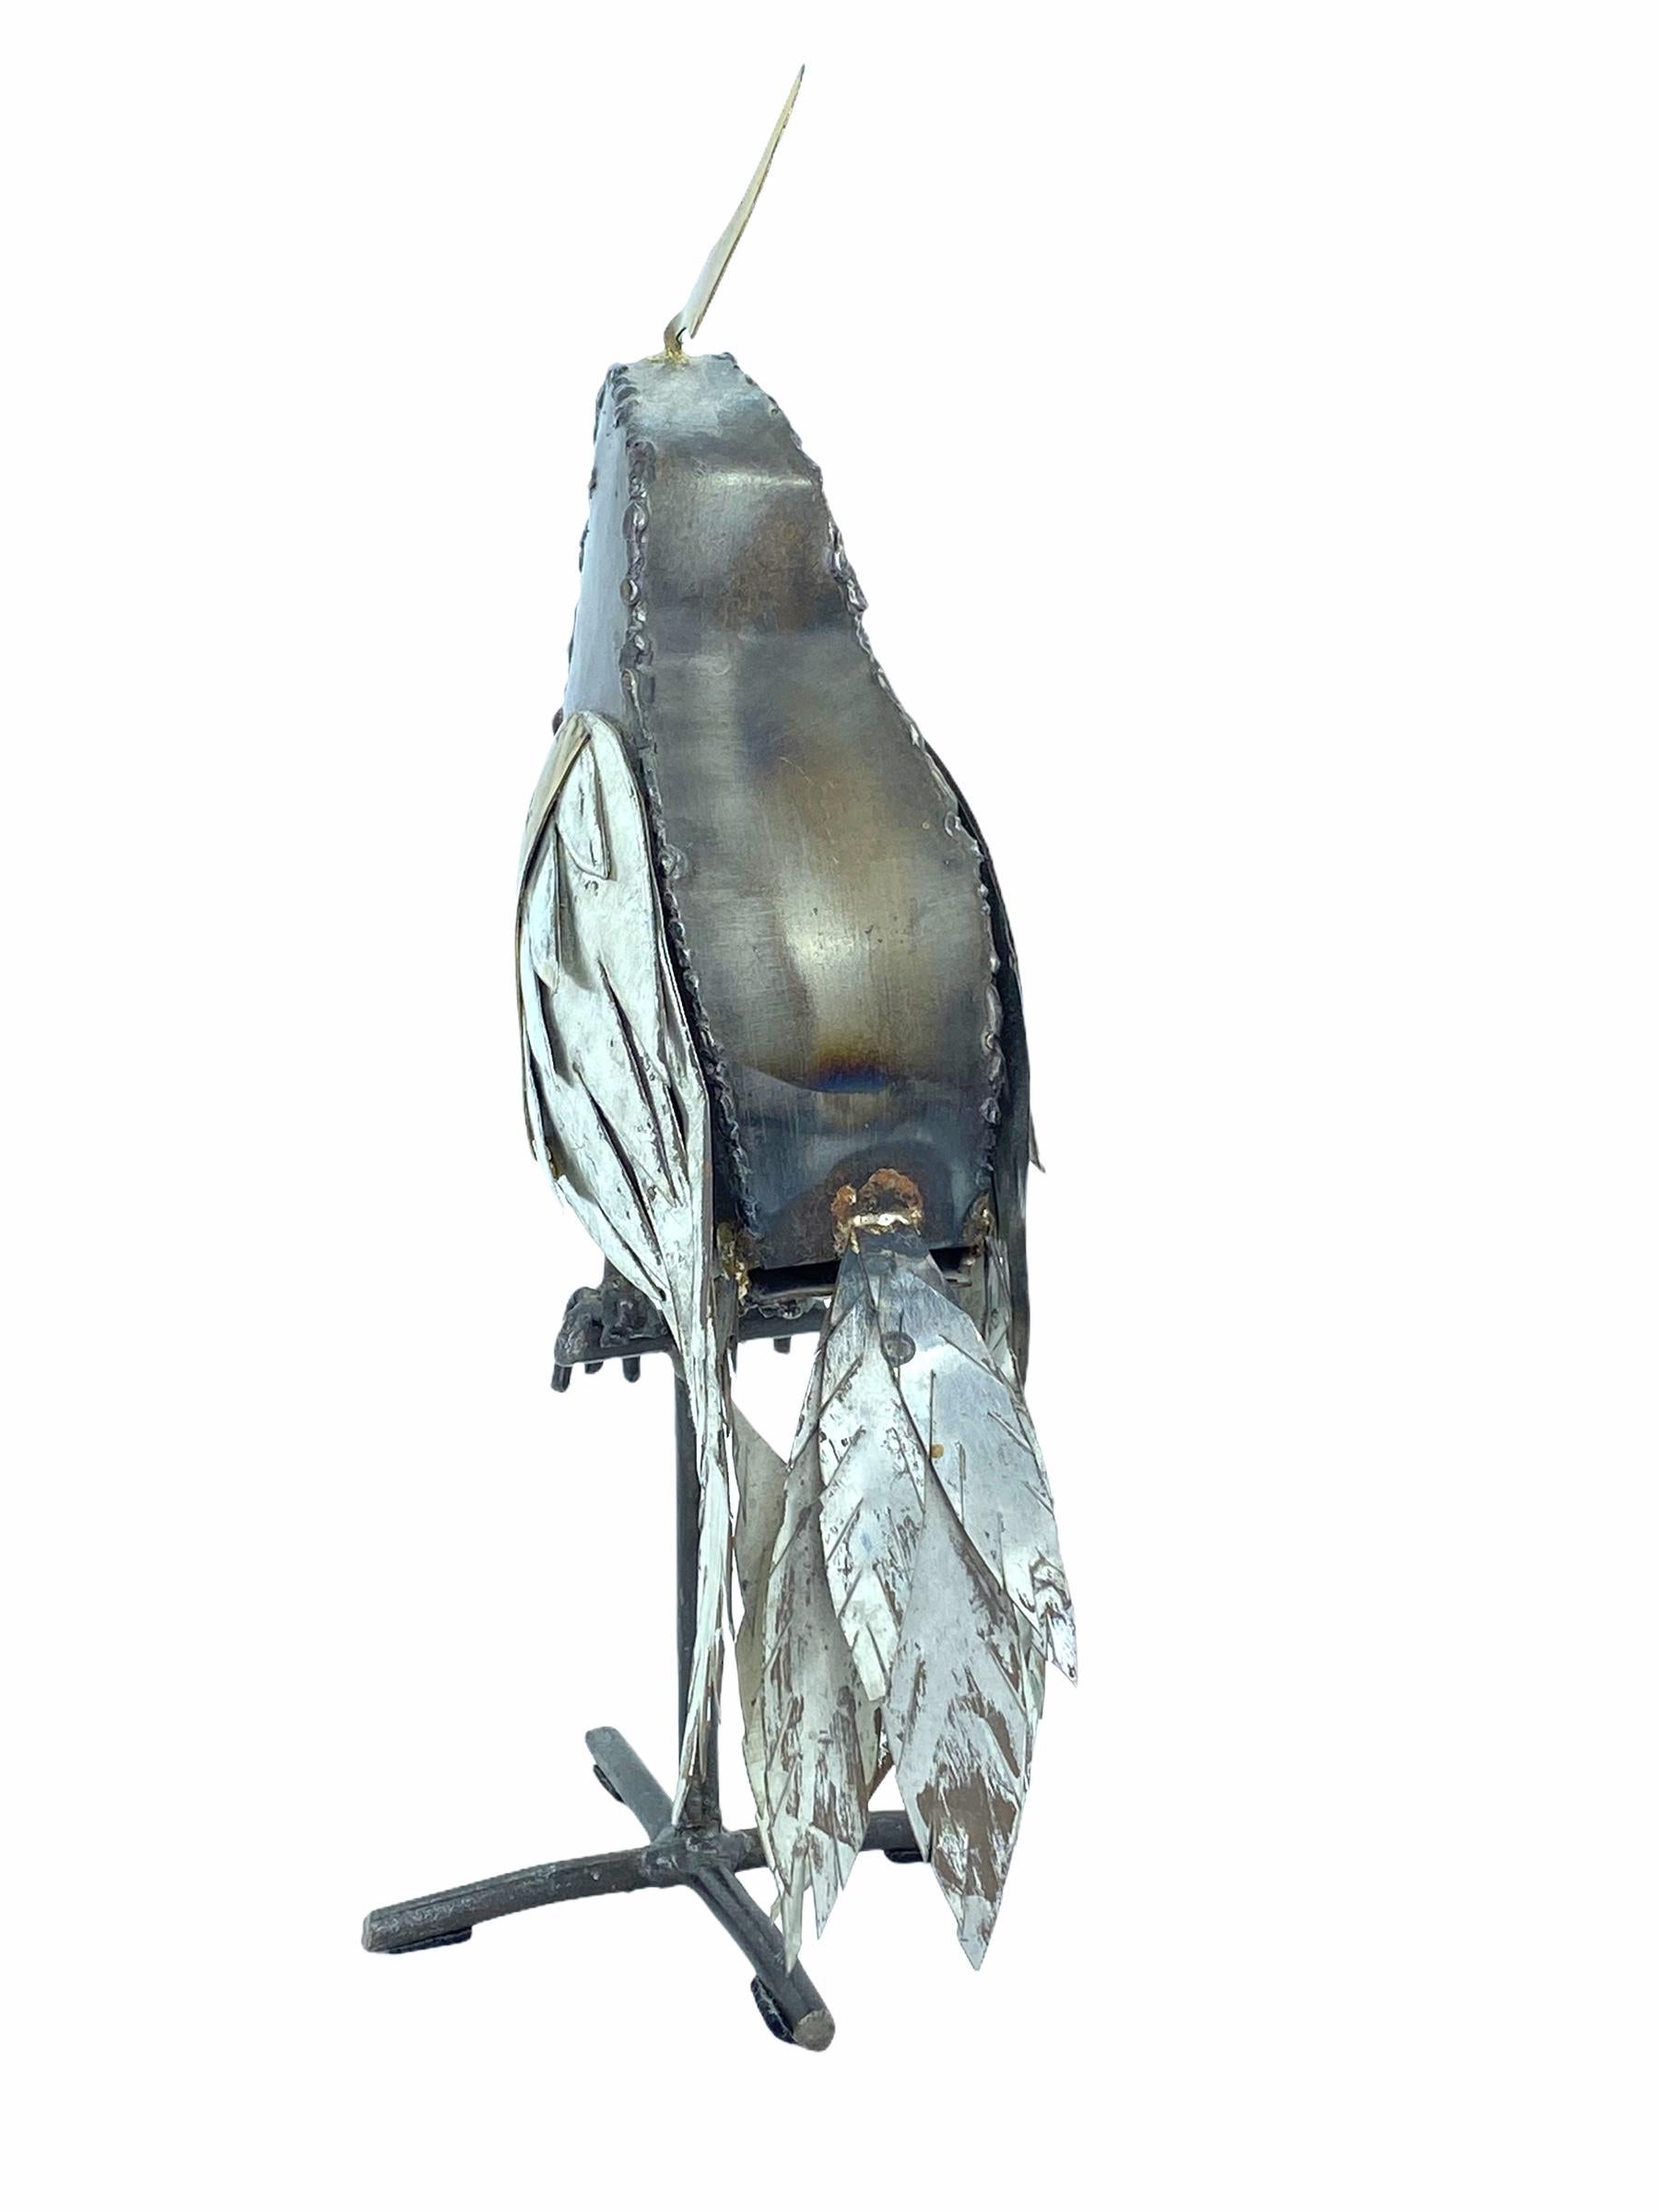 Brutalist parrot sculpture in the style of Sergio Bustamante or Alexander Blazquez. 
Handcrafted and welded out of different colored metals. Perched parrot on metal stand.
Ideal size for bookcase/etagere styling.Perfect gift idea for the